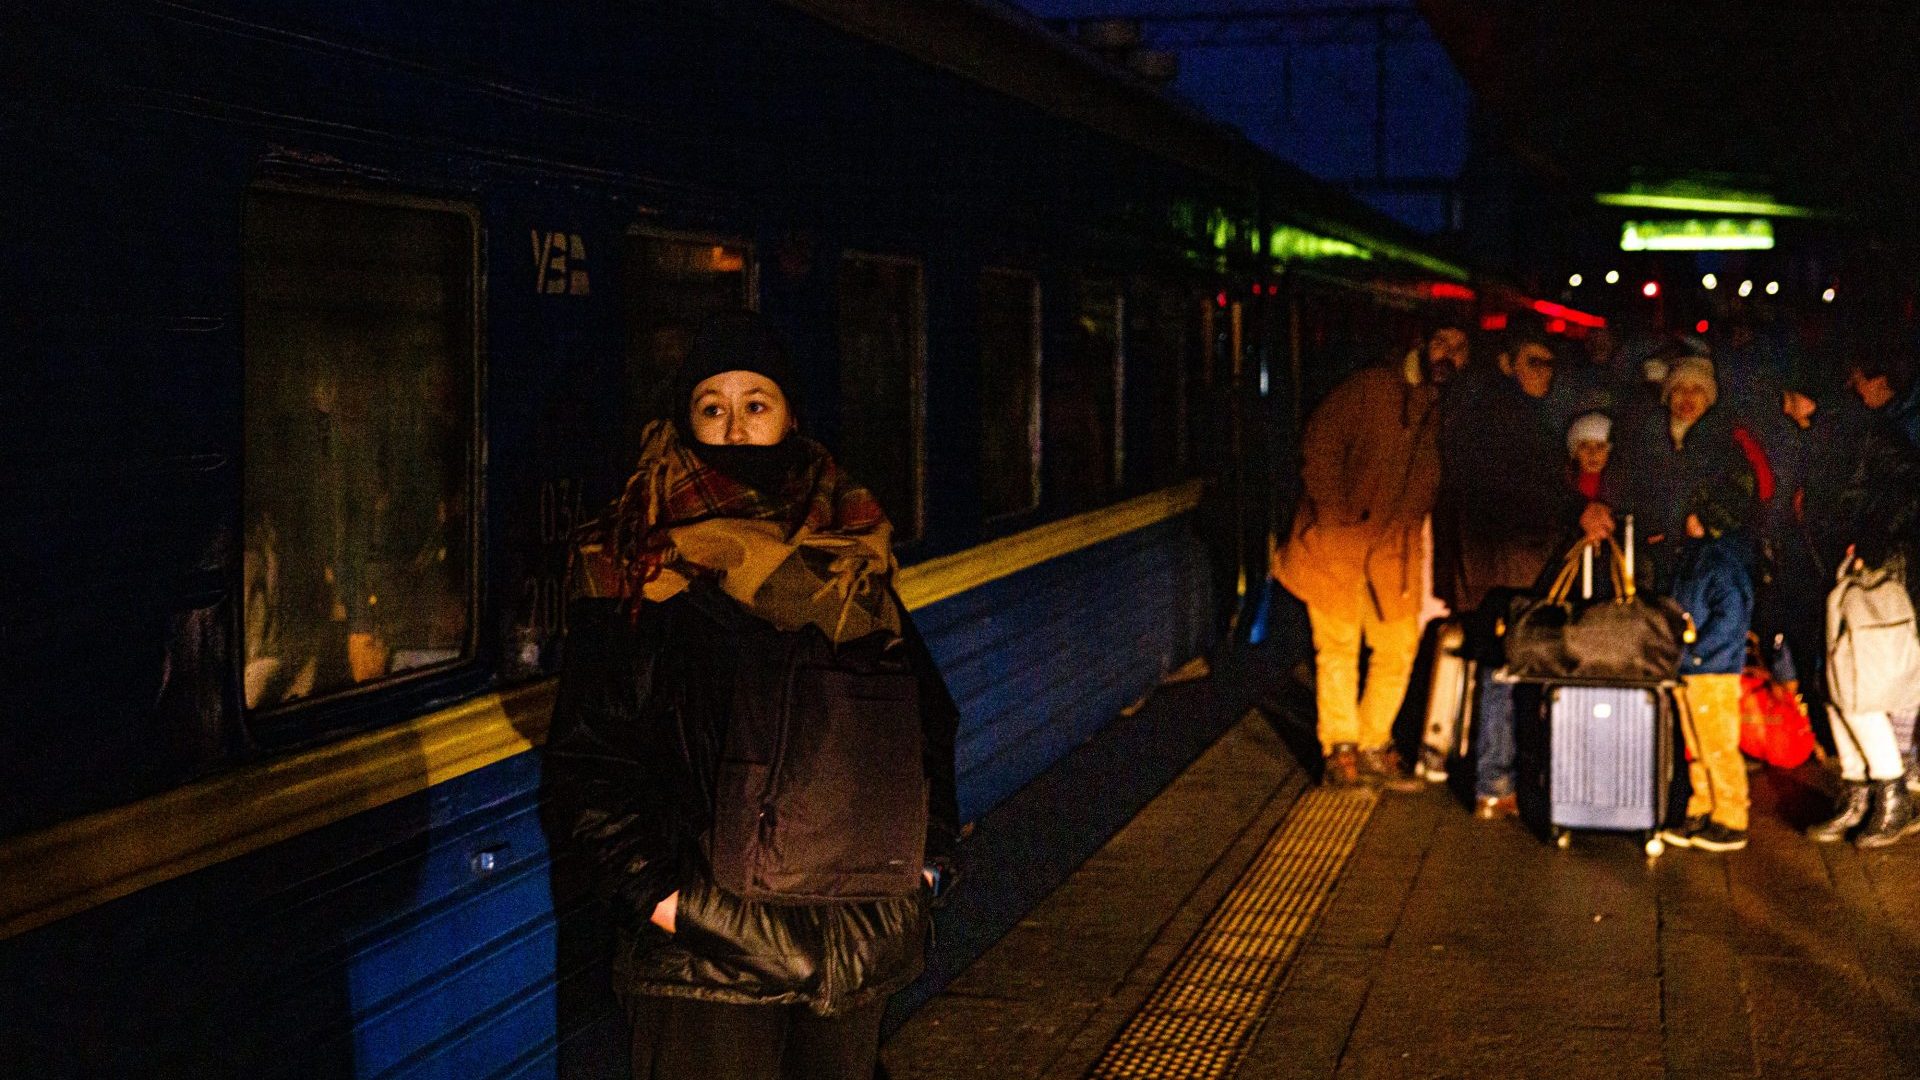 A woman waits to board an evacuation train at Kyiv central train station. Photo:DIMITAR DILKOFF/AFP via Getty Images